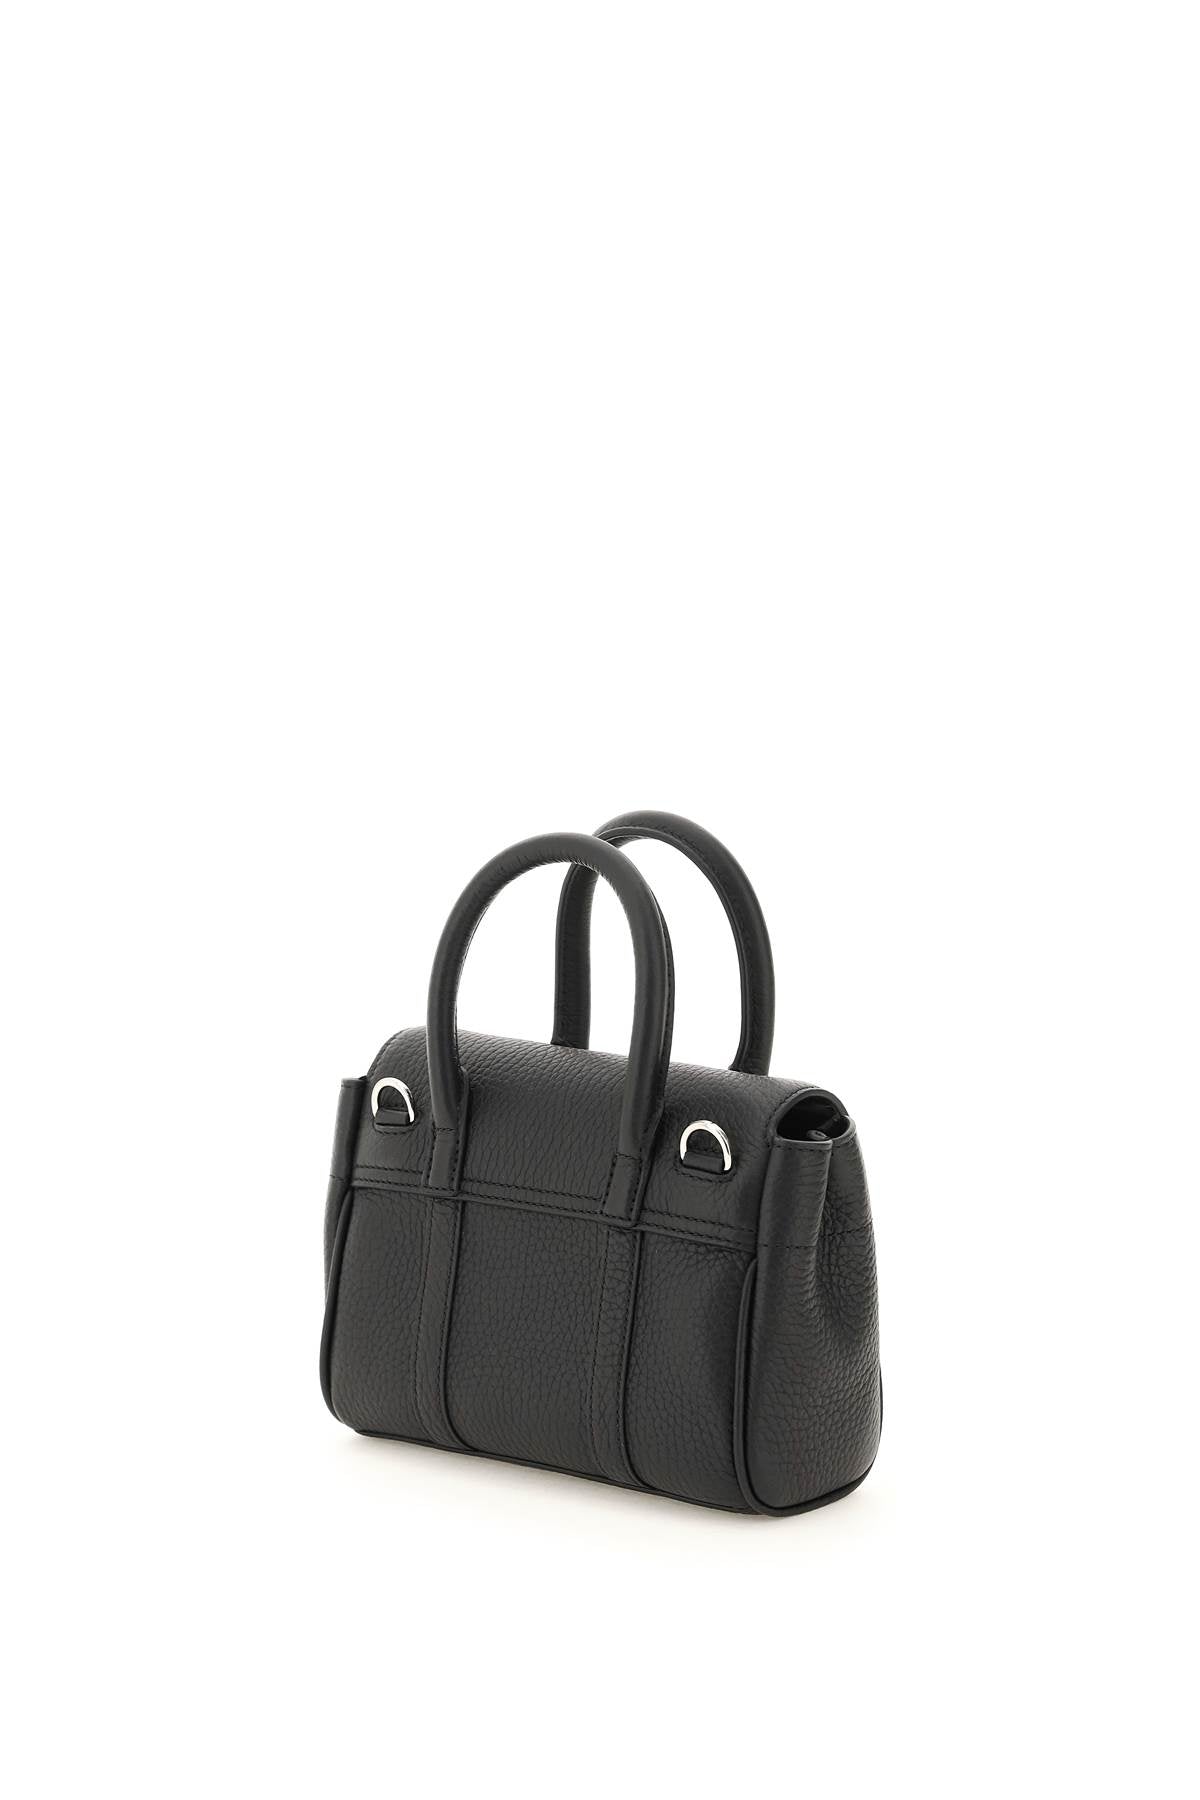 MULBERRY Mini Bayswater Black Leather Handbag with Postman’s Lock and Detachable Strap